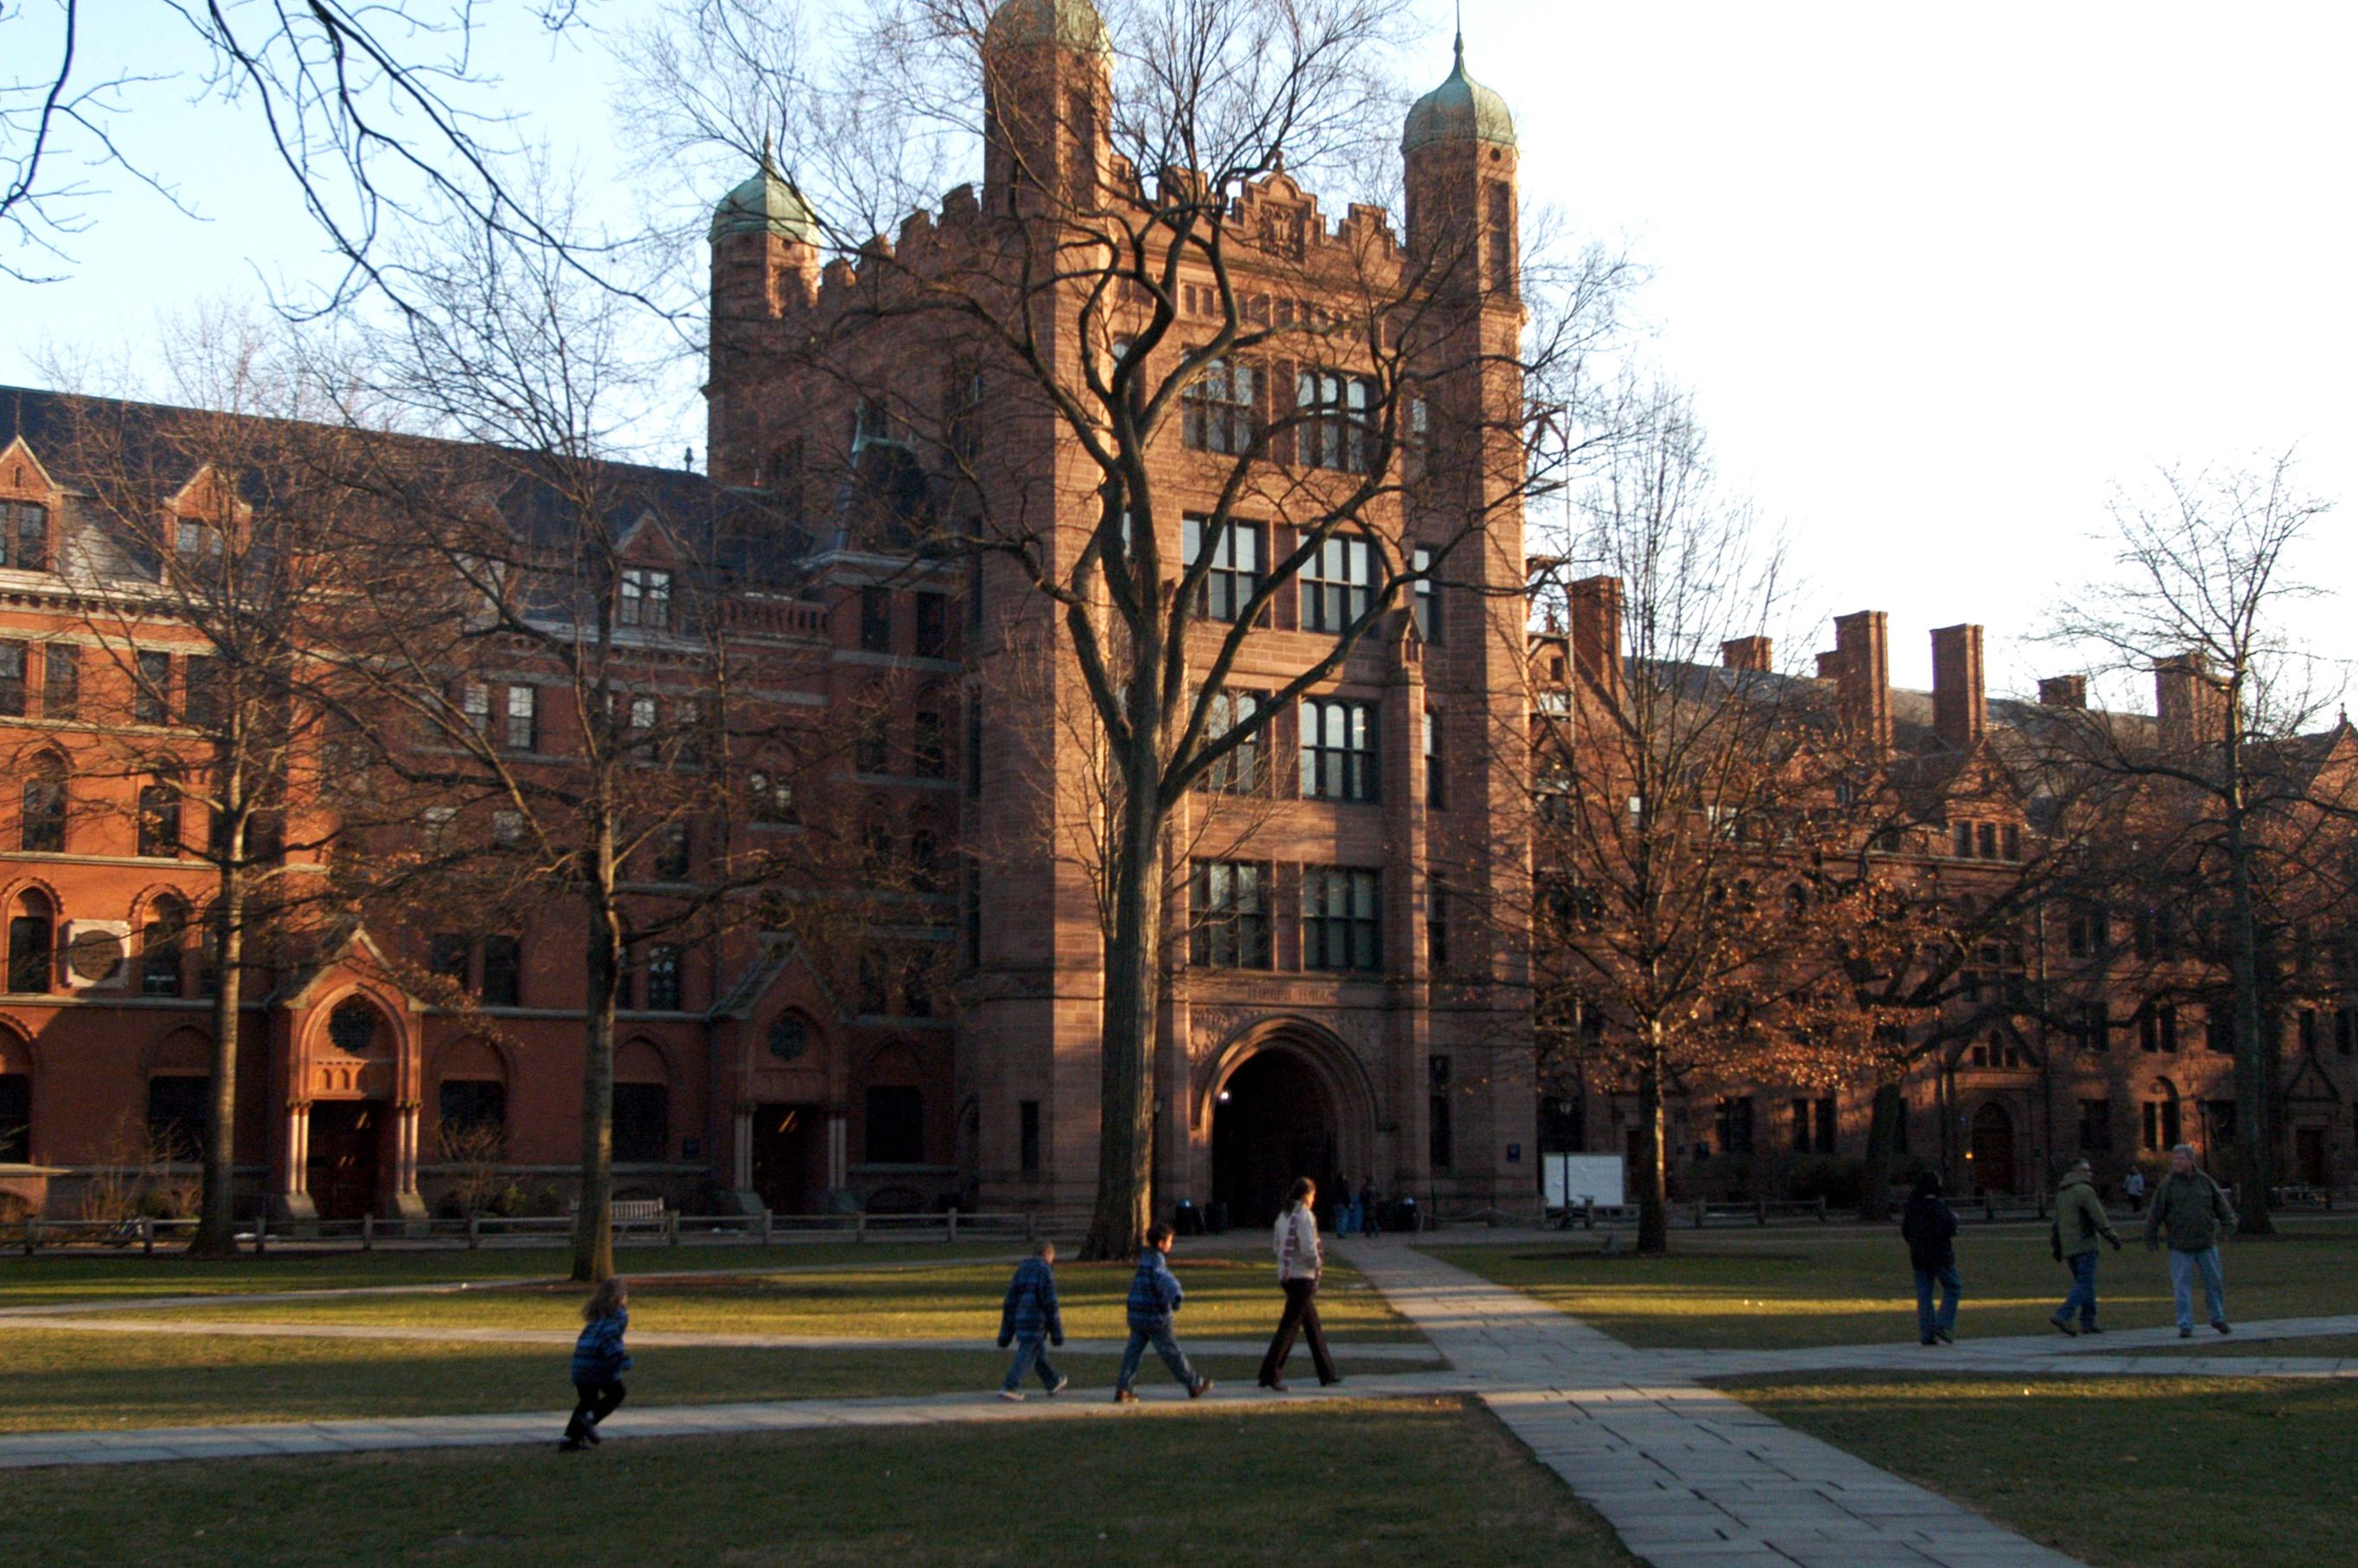 There Is No Single 'Best College' in Money's New Rating System